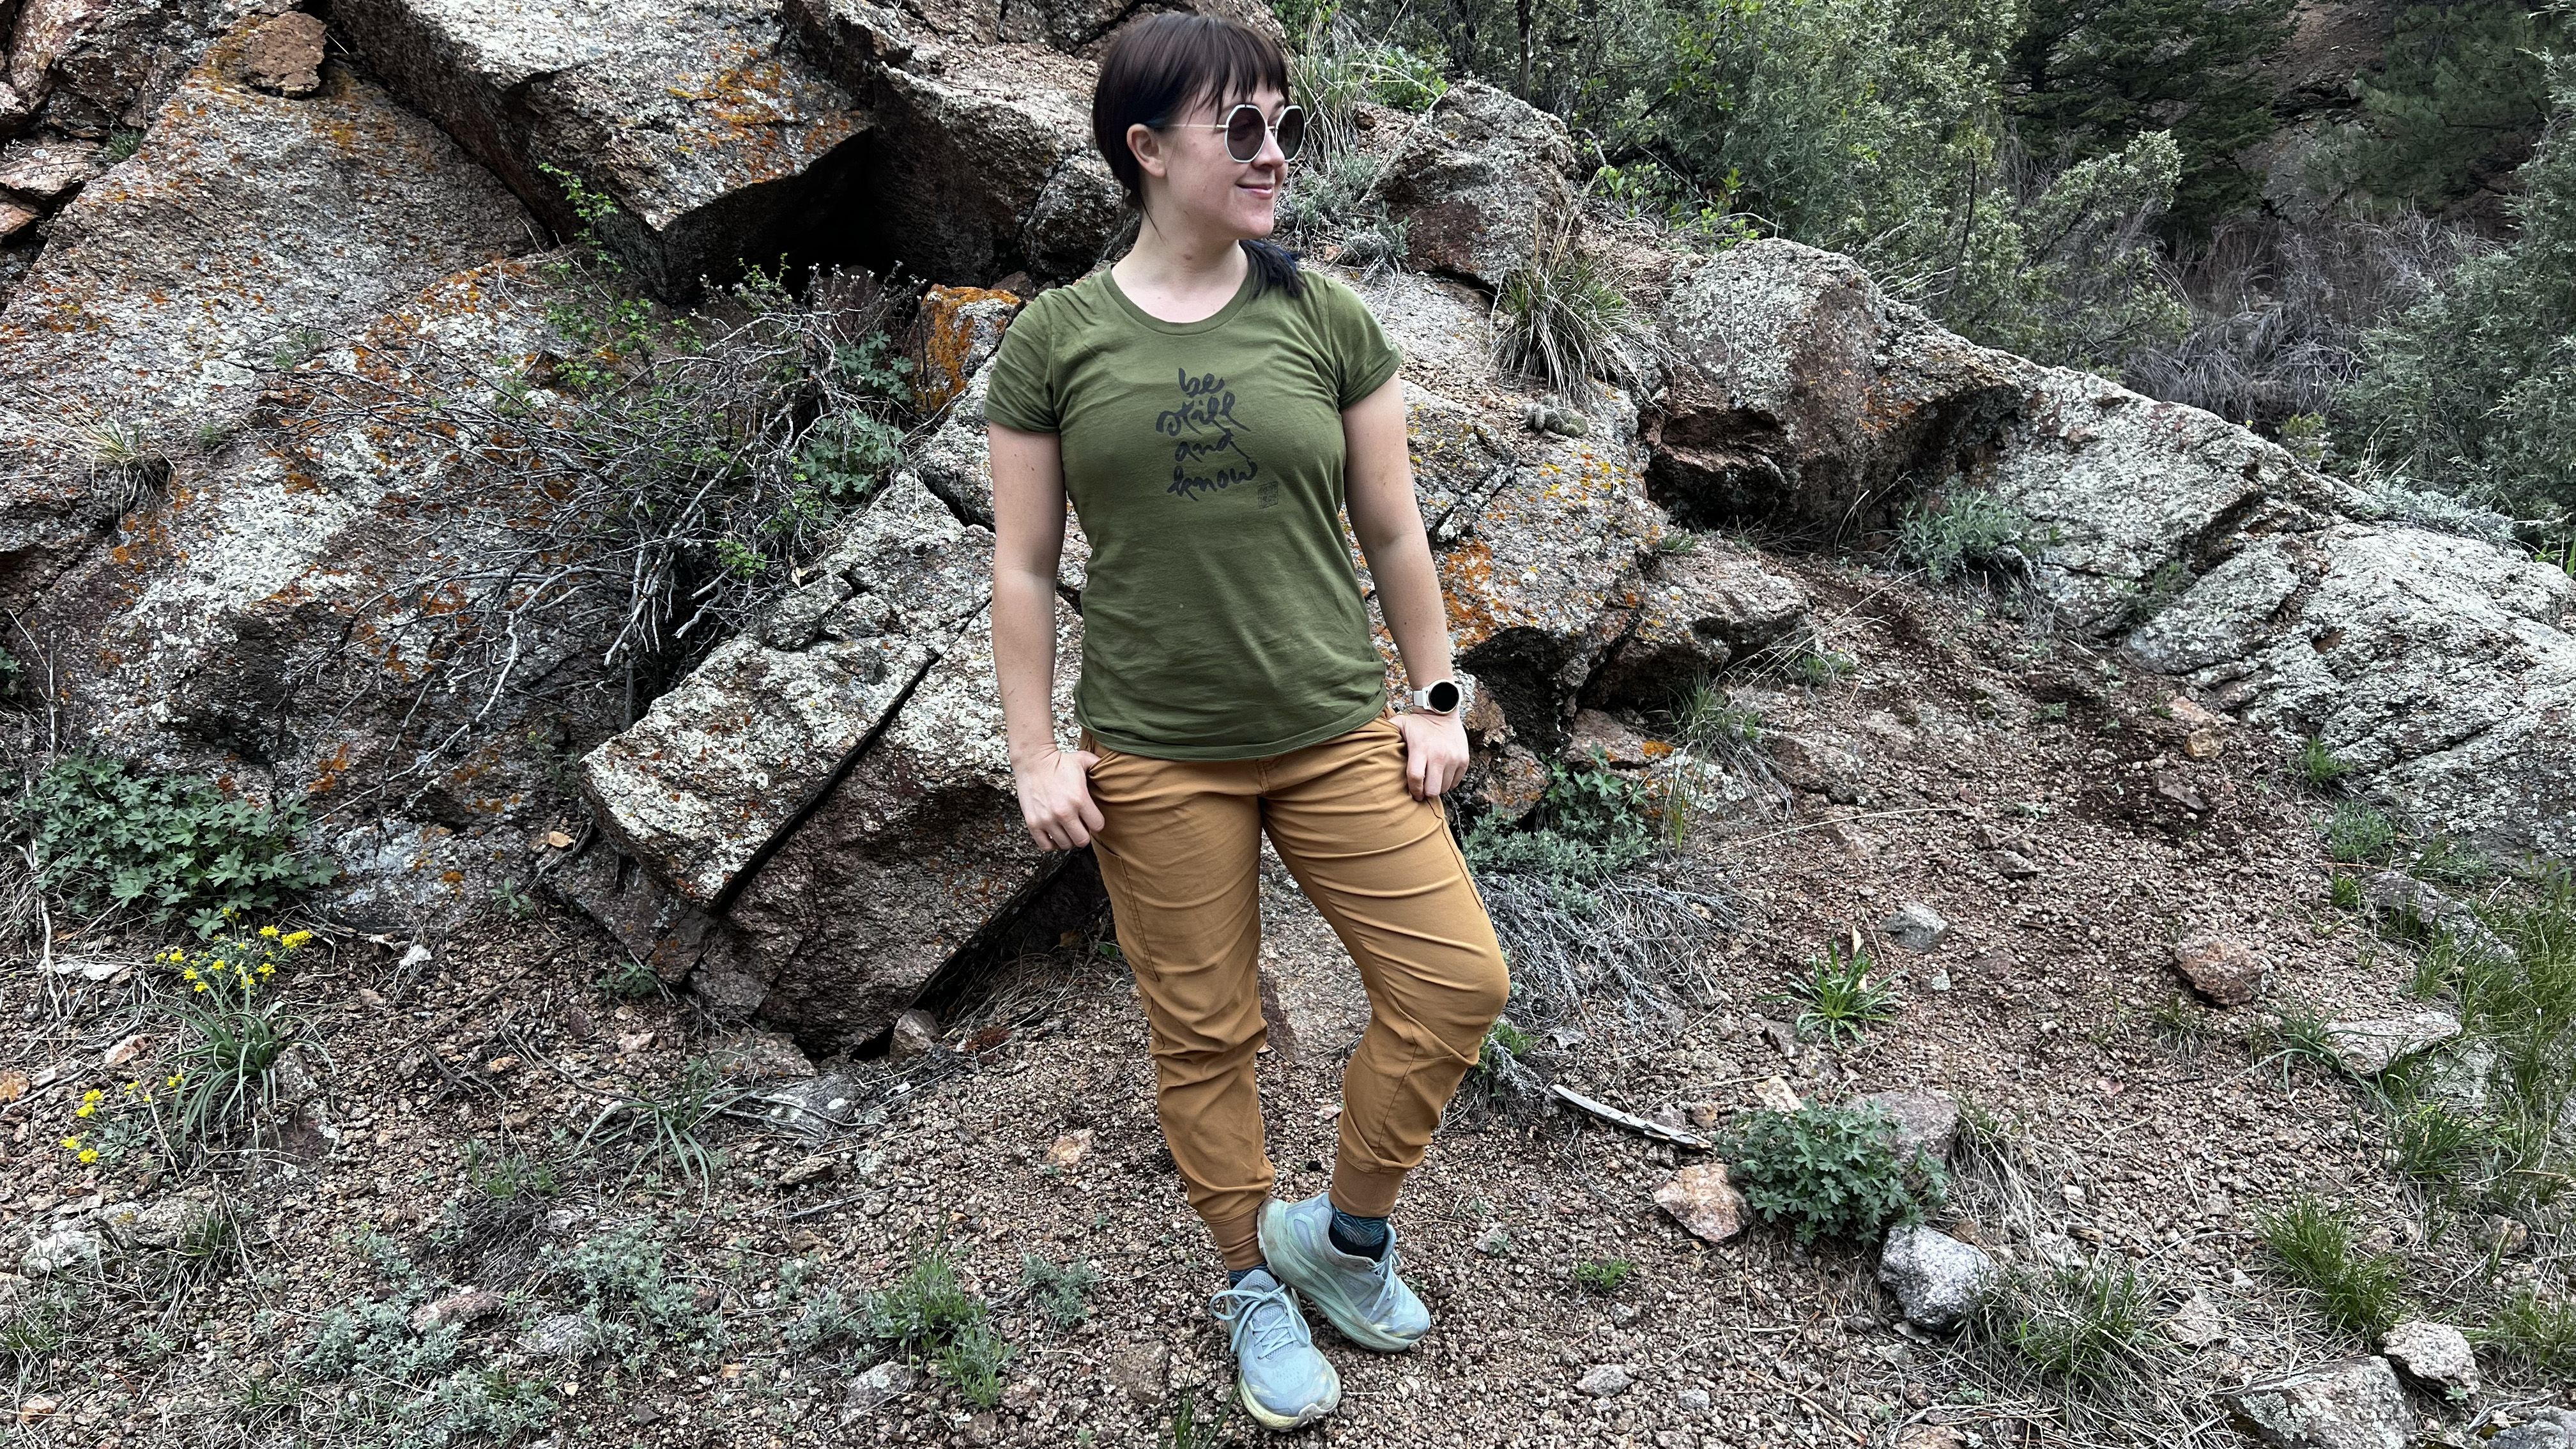 Prana Halle Jogger II review: Style from trail to town